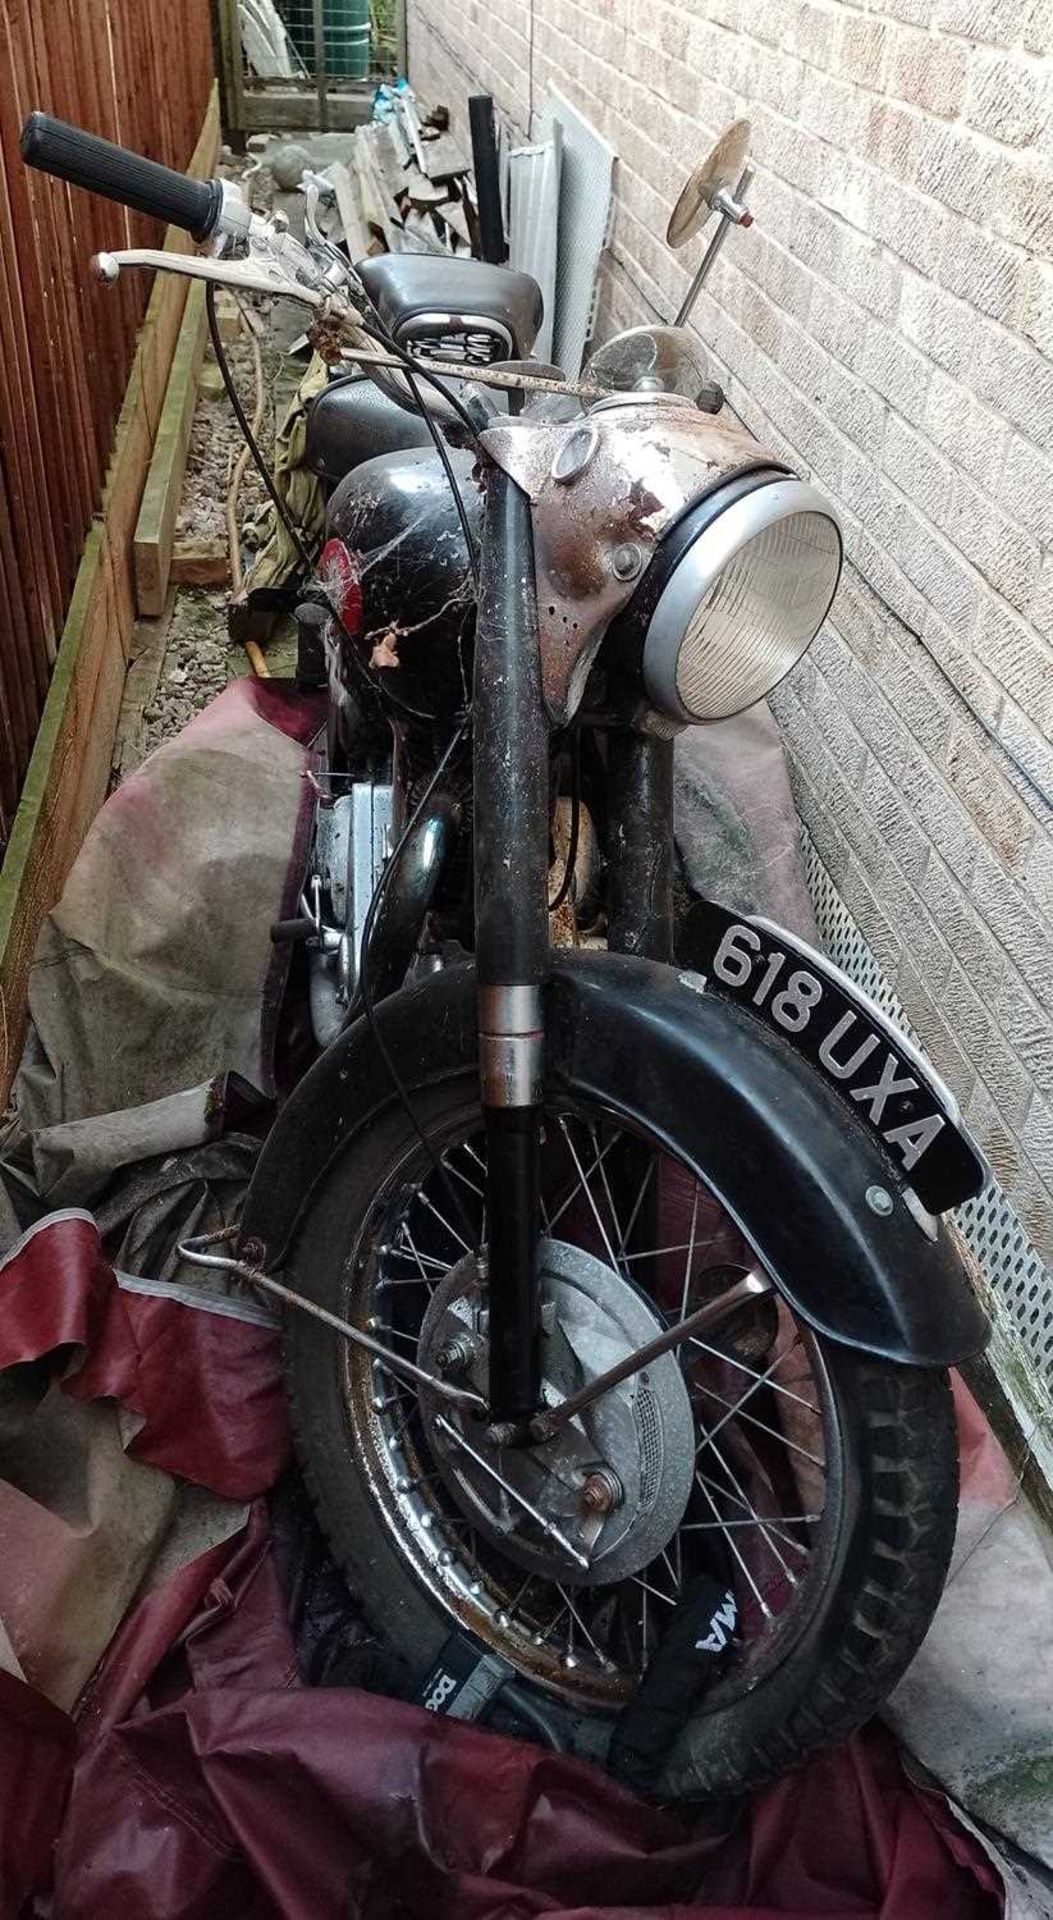 1954 BSA M33 Motorcycle 500cc Non-transferrable age commensurate number plate verified by Roy - Image 7 of 13